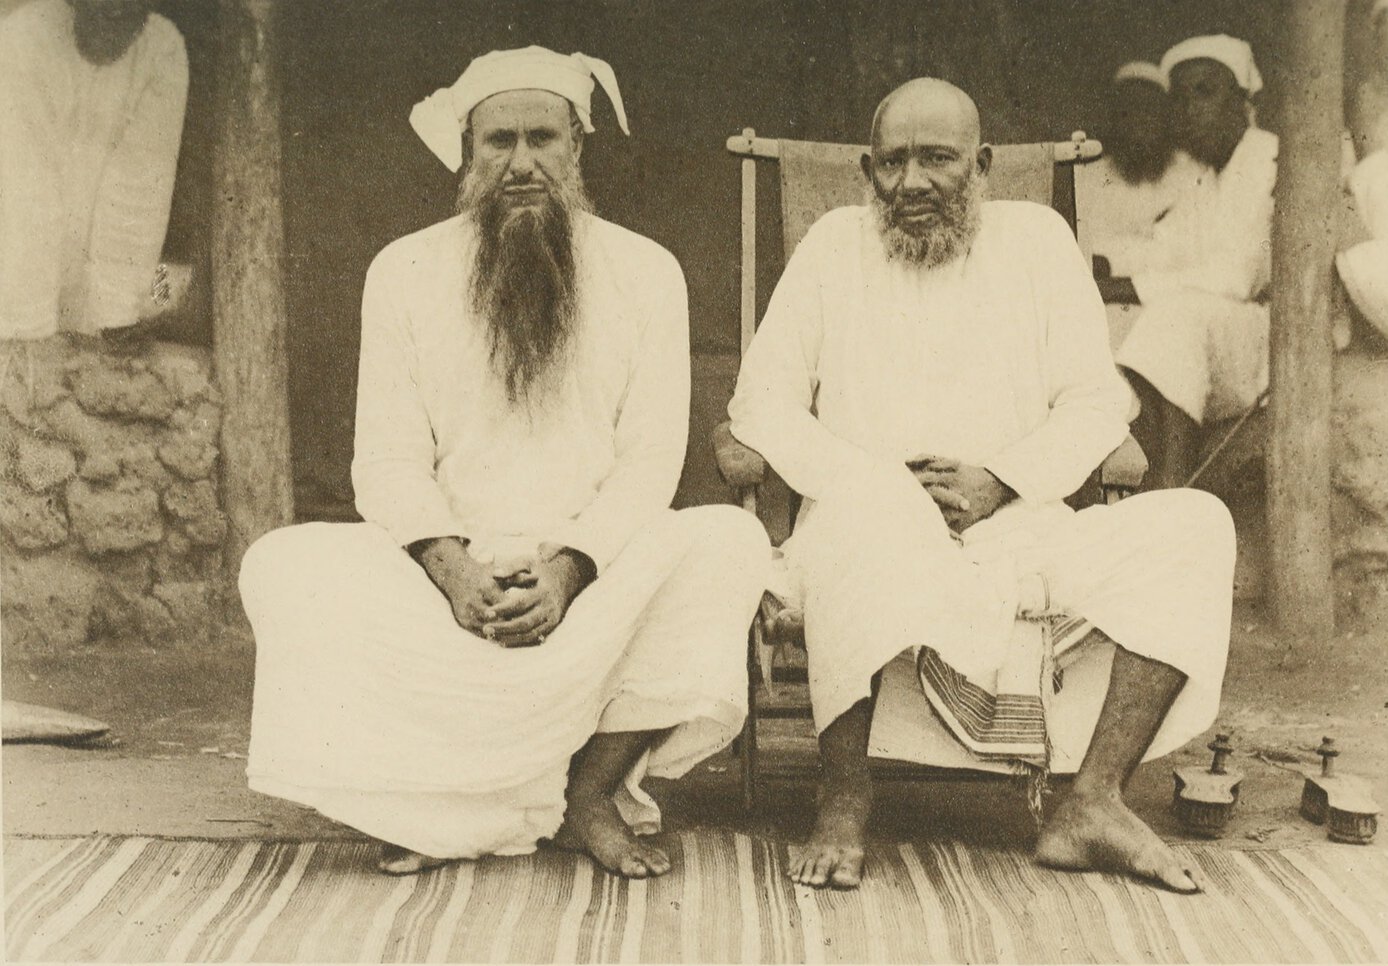 Buéna-N'zigué and Tippu Tip seated side by side and facing forward